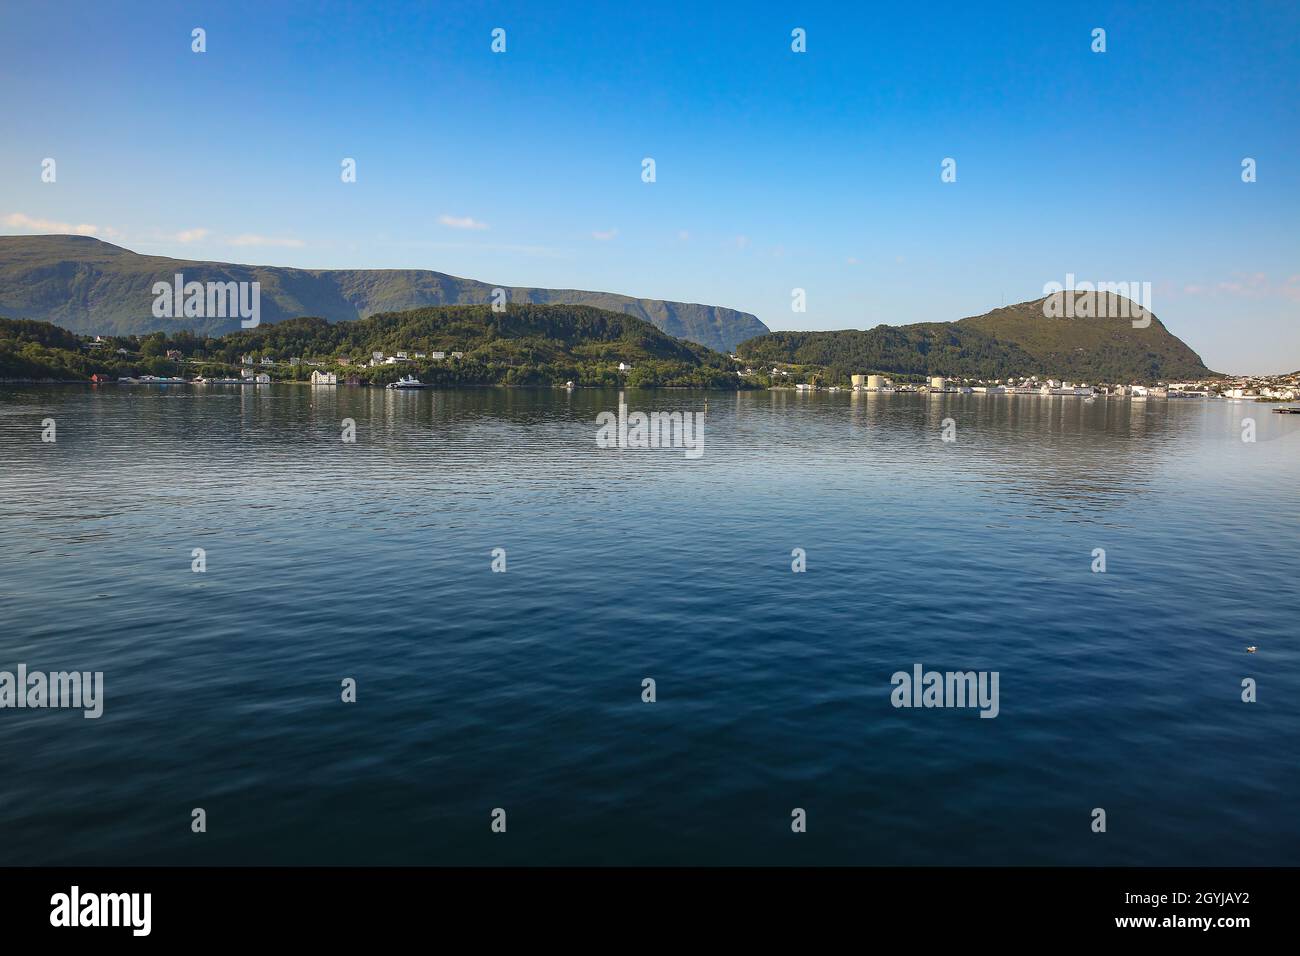 View of the beautiful landscape of the archipelago, islands and fjords with reflections of the land in the ocean, from the port of Alesund, Norway. Stock Photo